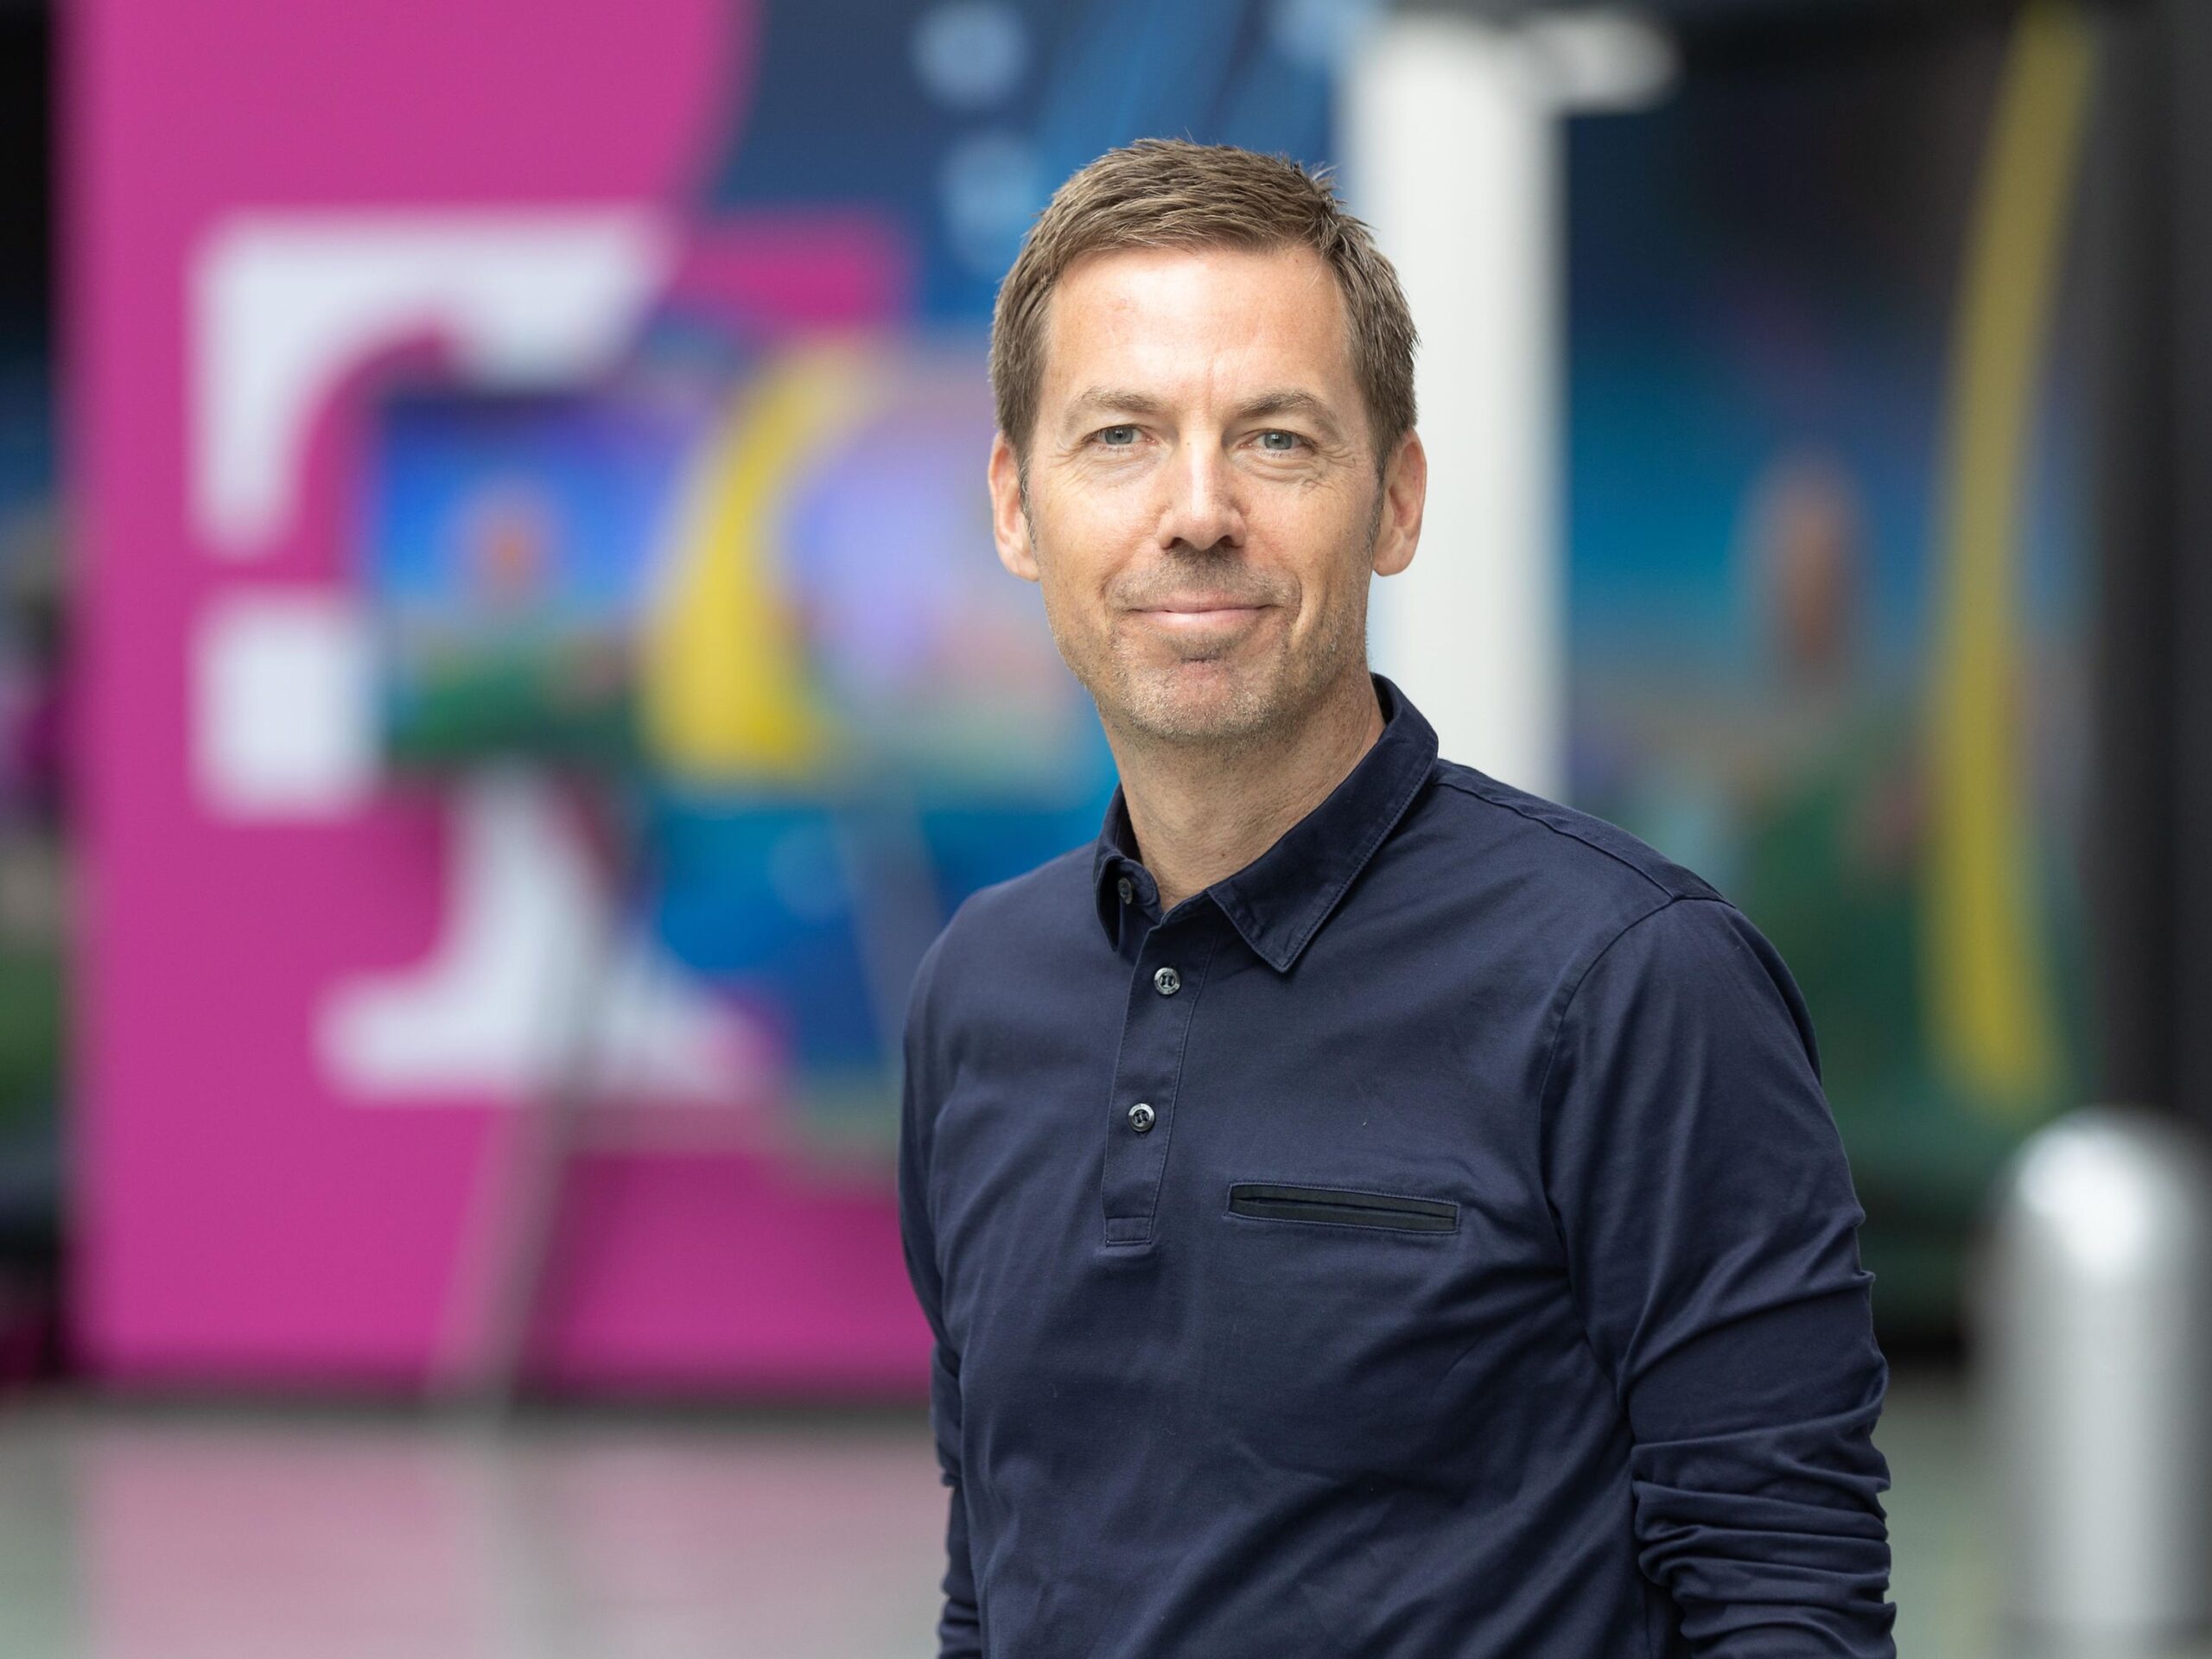 Experienced Leader Wolfgang Metze Joins Deutsche Telekom as MD of Private  Customers | EuropaWire.eu | The European Union's press release distribution  & newswire service